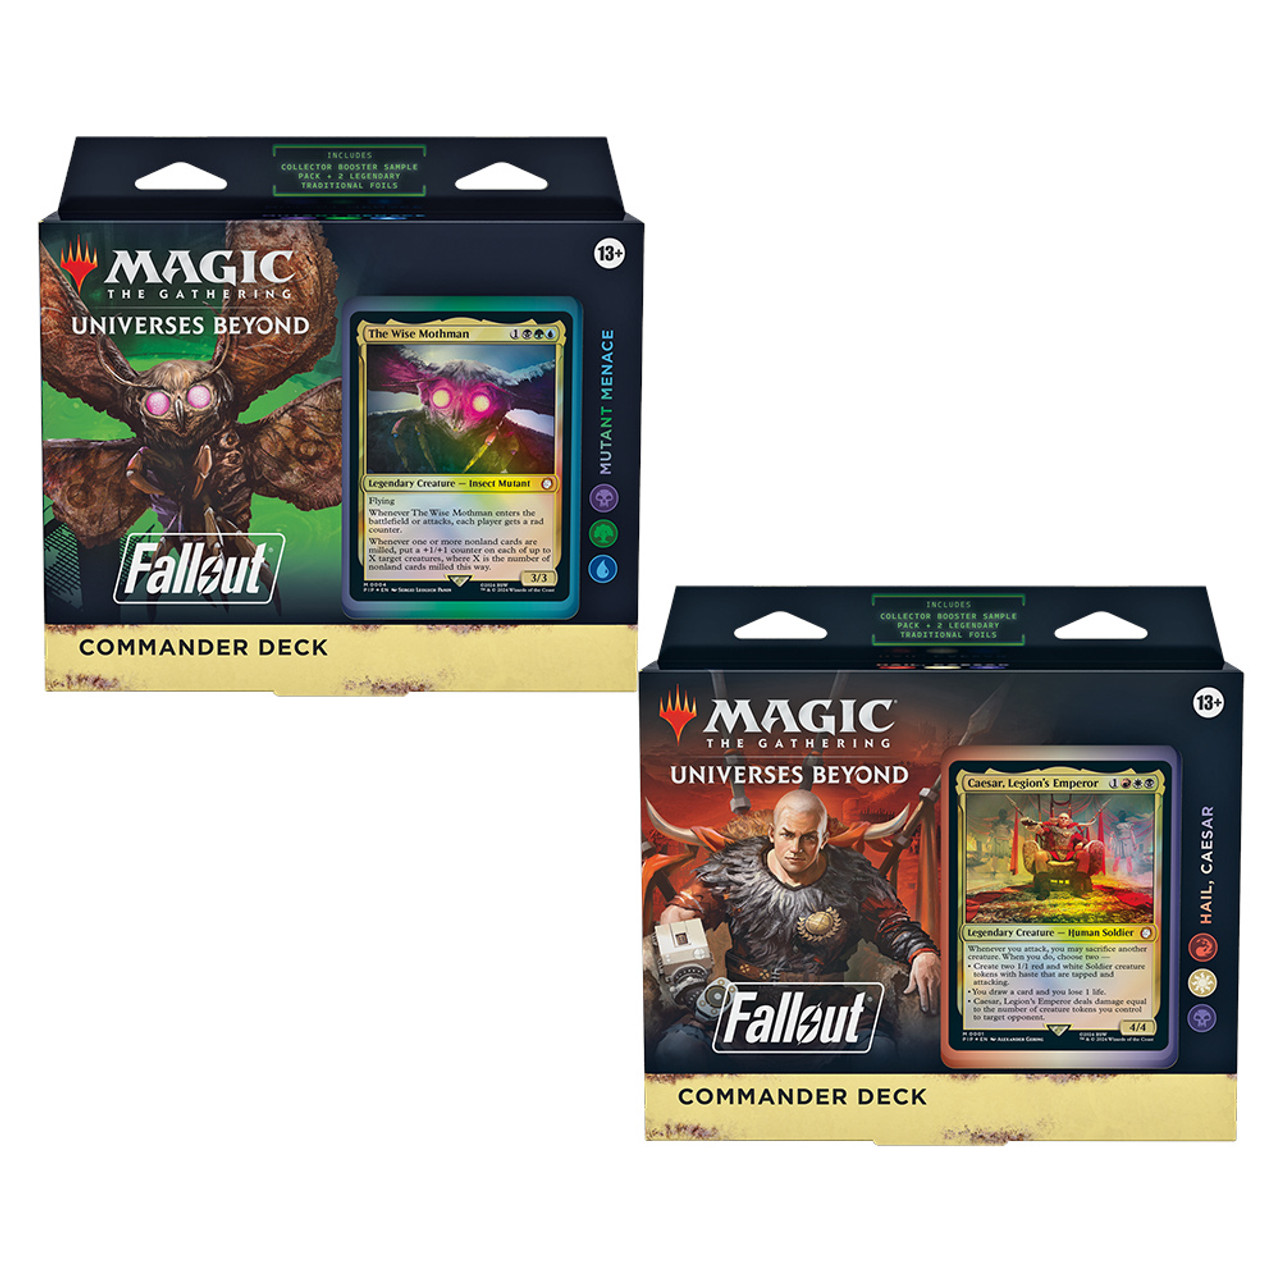 Magic the Gathering: Fallout Commander Deck Display (Set of 4)